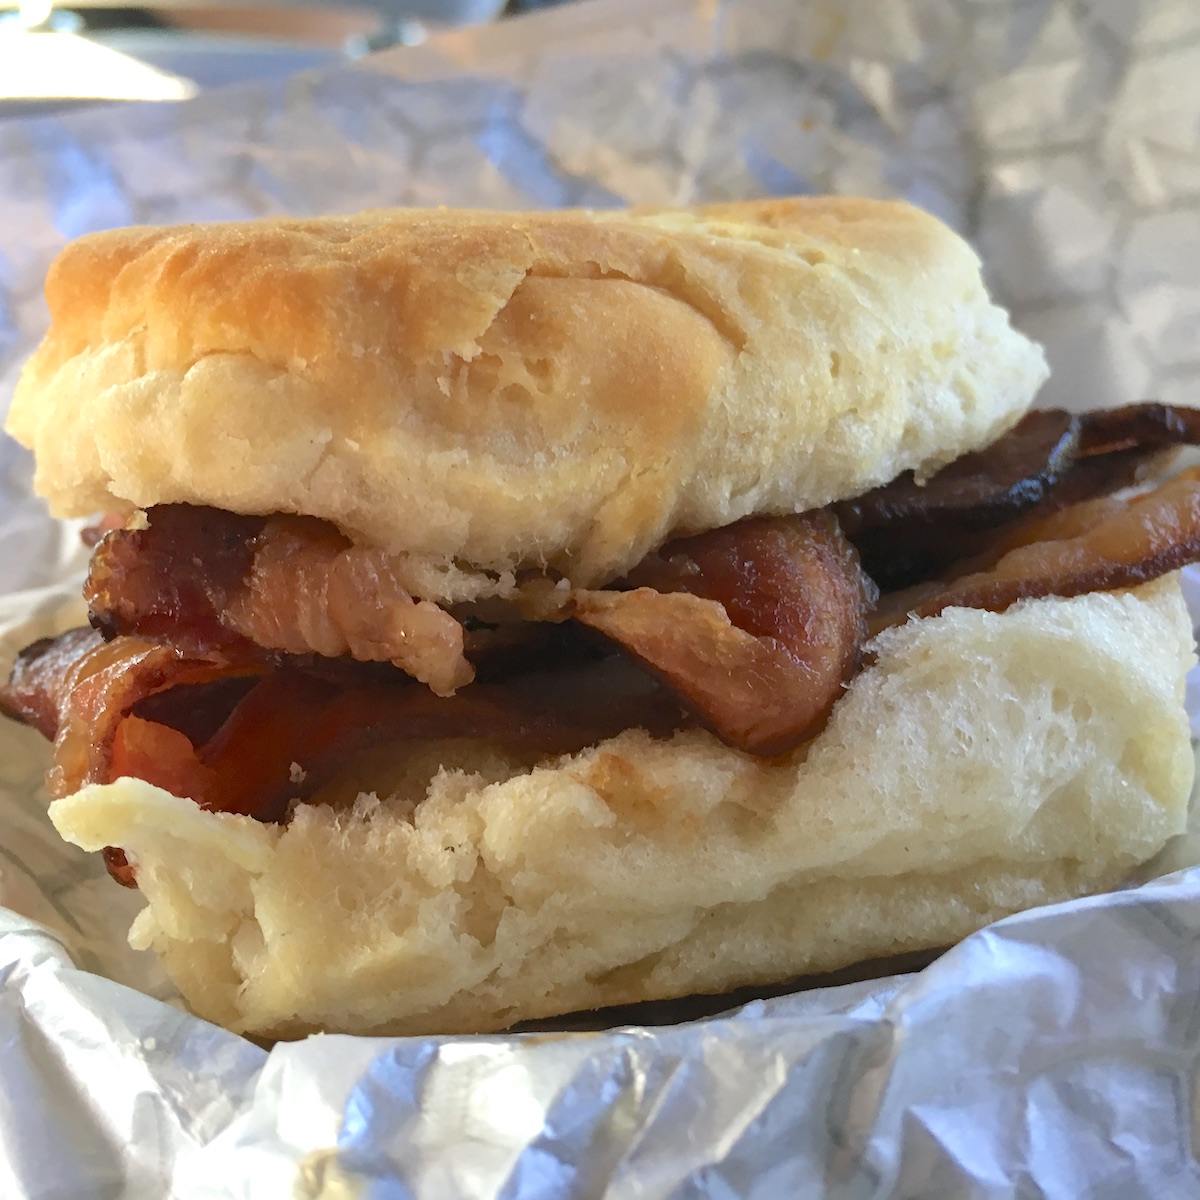 Bacon Biscuit from Carroll’s Sausage & Country Store in Ashburn, Georgia